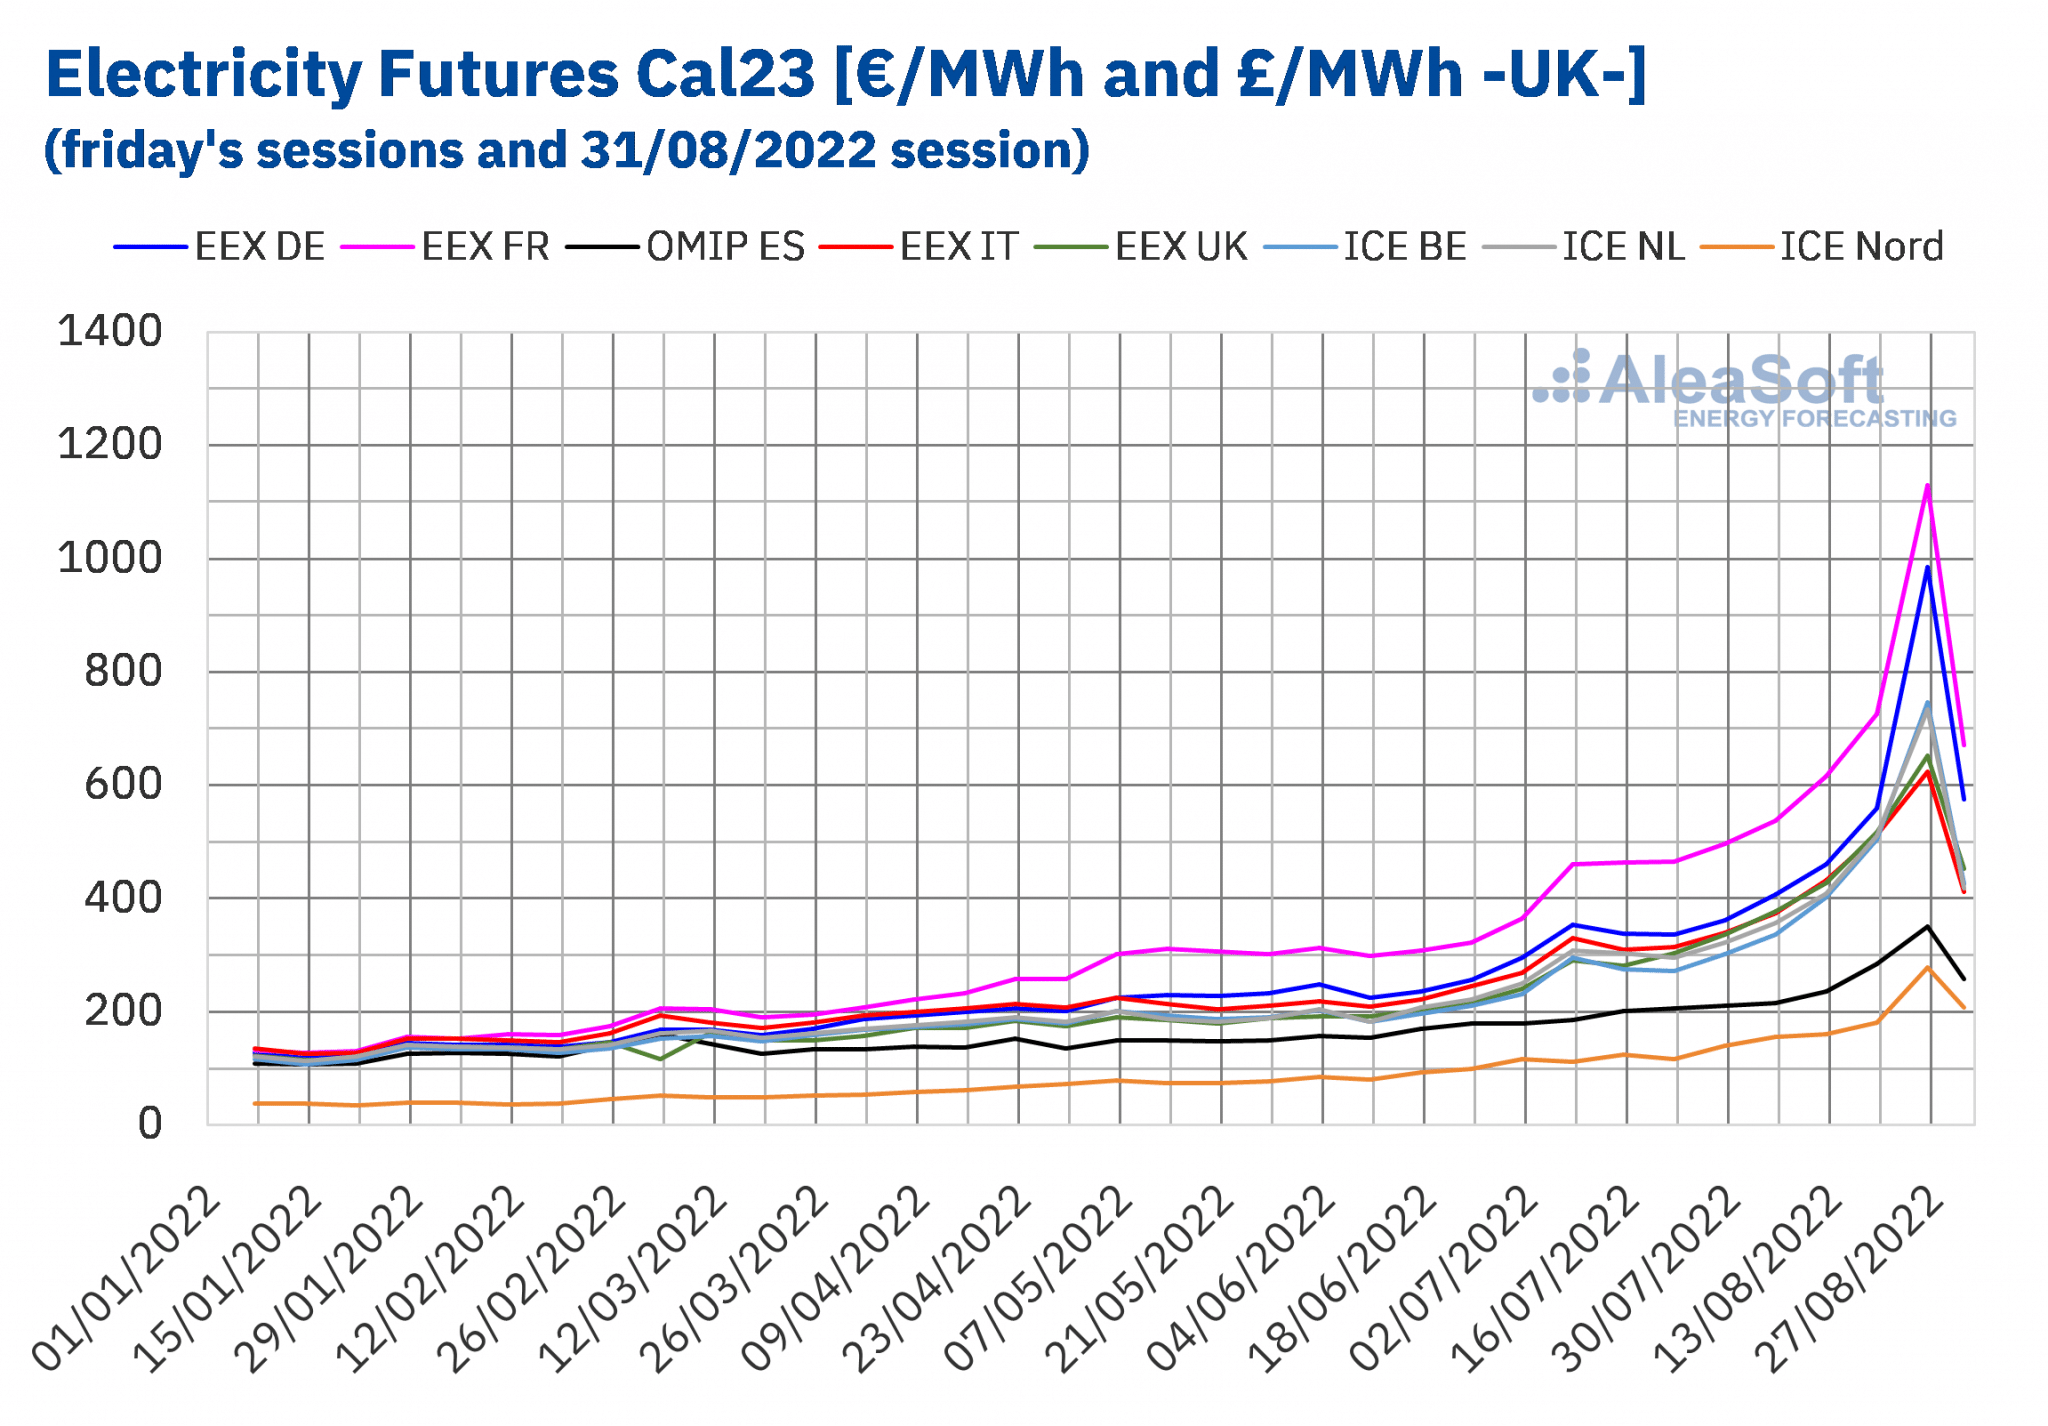 Electrici- ty futures Cal23 August 2022